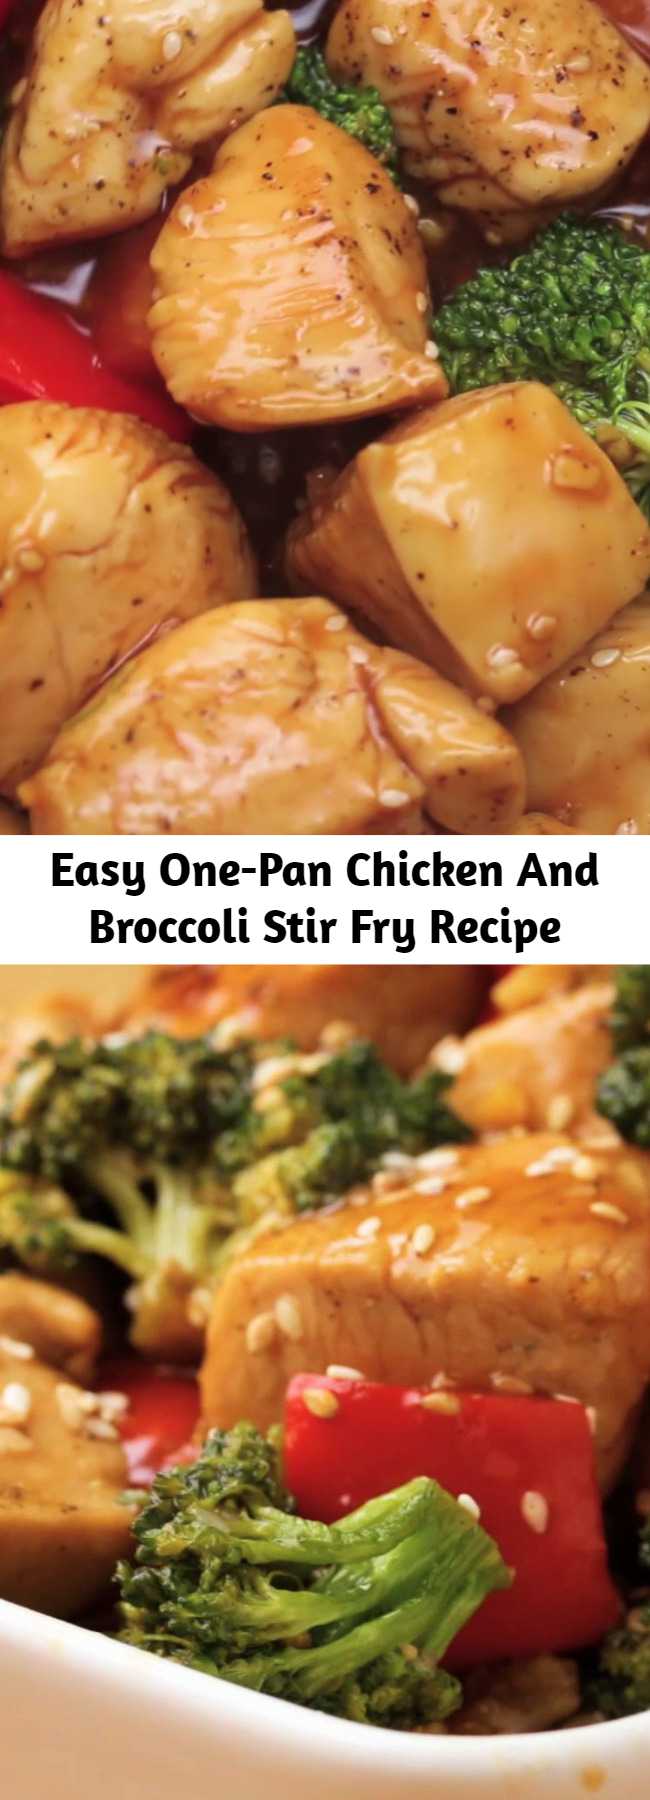 Easy One-Pan Chicken And Broccoli Stir Fry Recipe - This recipe for chicken and broccoli stir fry is a classic dish of chicken sauteed with fresh broccoli florets and coated in a savory sauce. You can have a healthy and easy dinner on the table in 30 minutes!